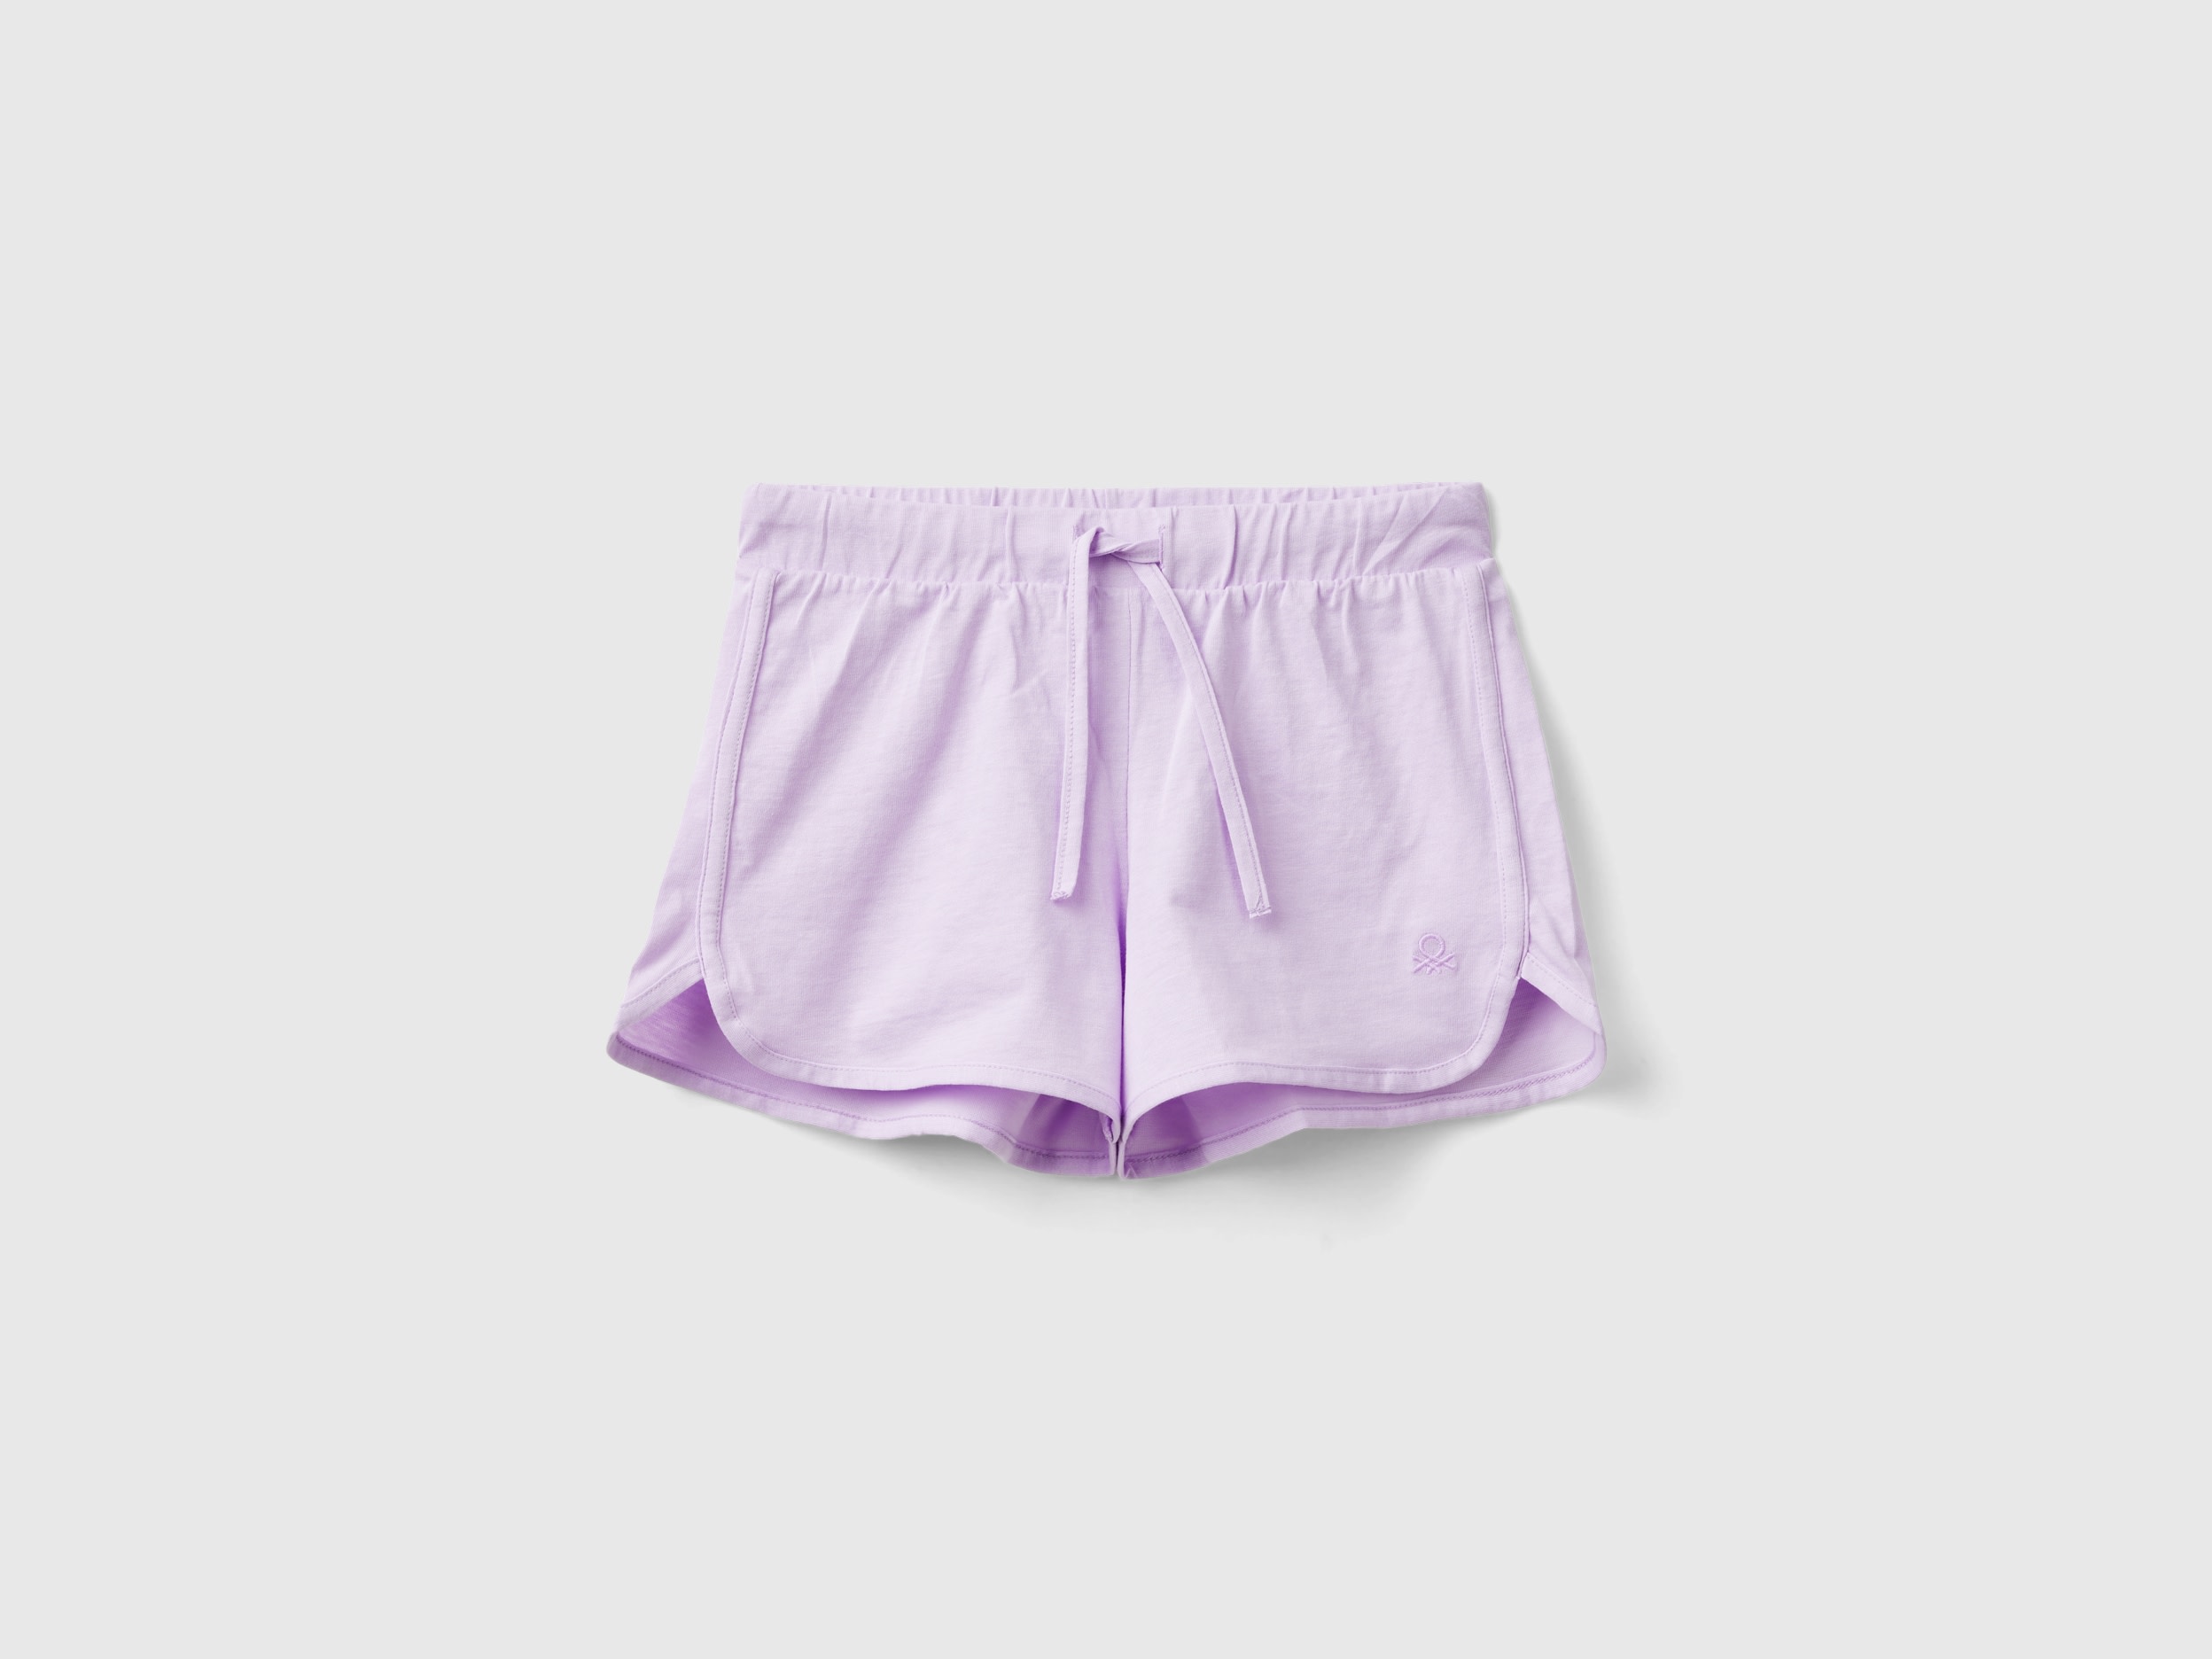 Image of Benetton, Runner Style Shorts In Organic Cotton, size M, Lilac, Kids